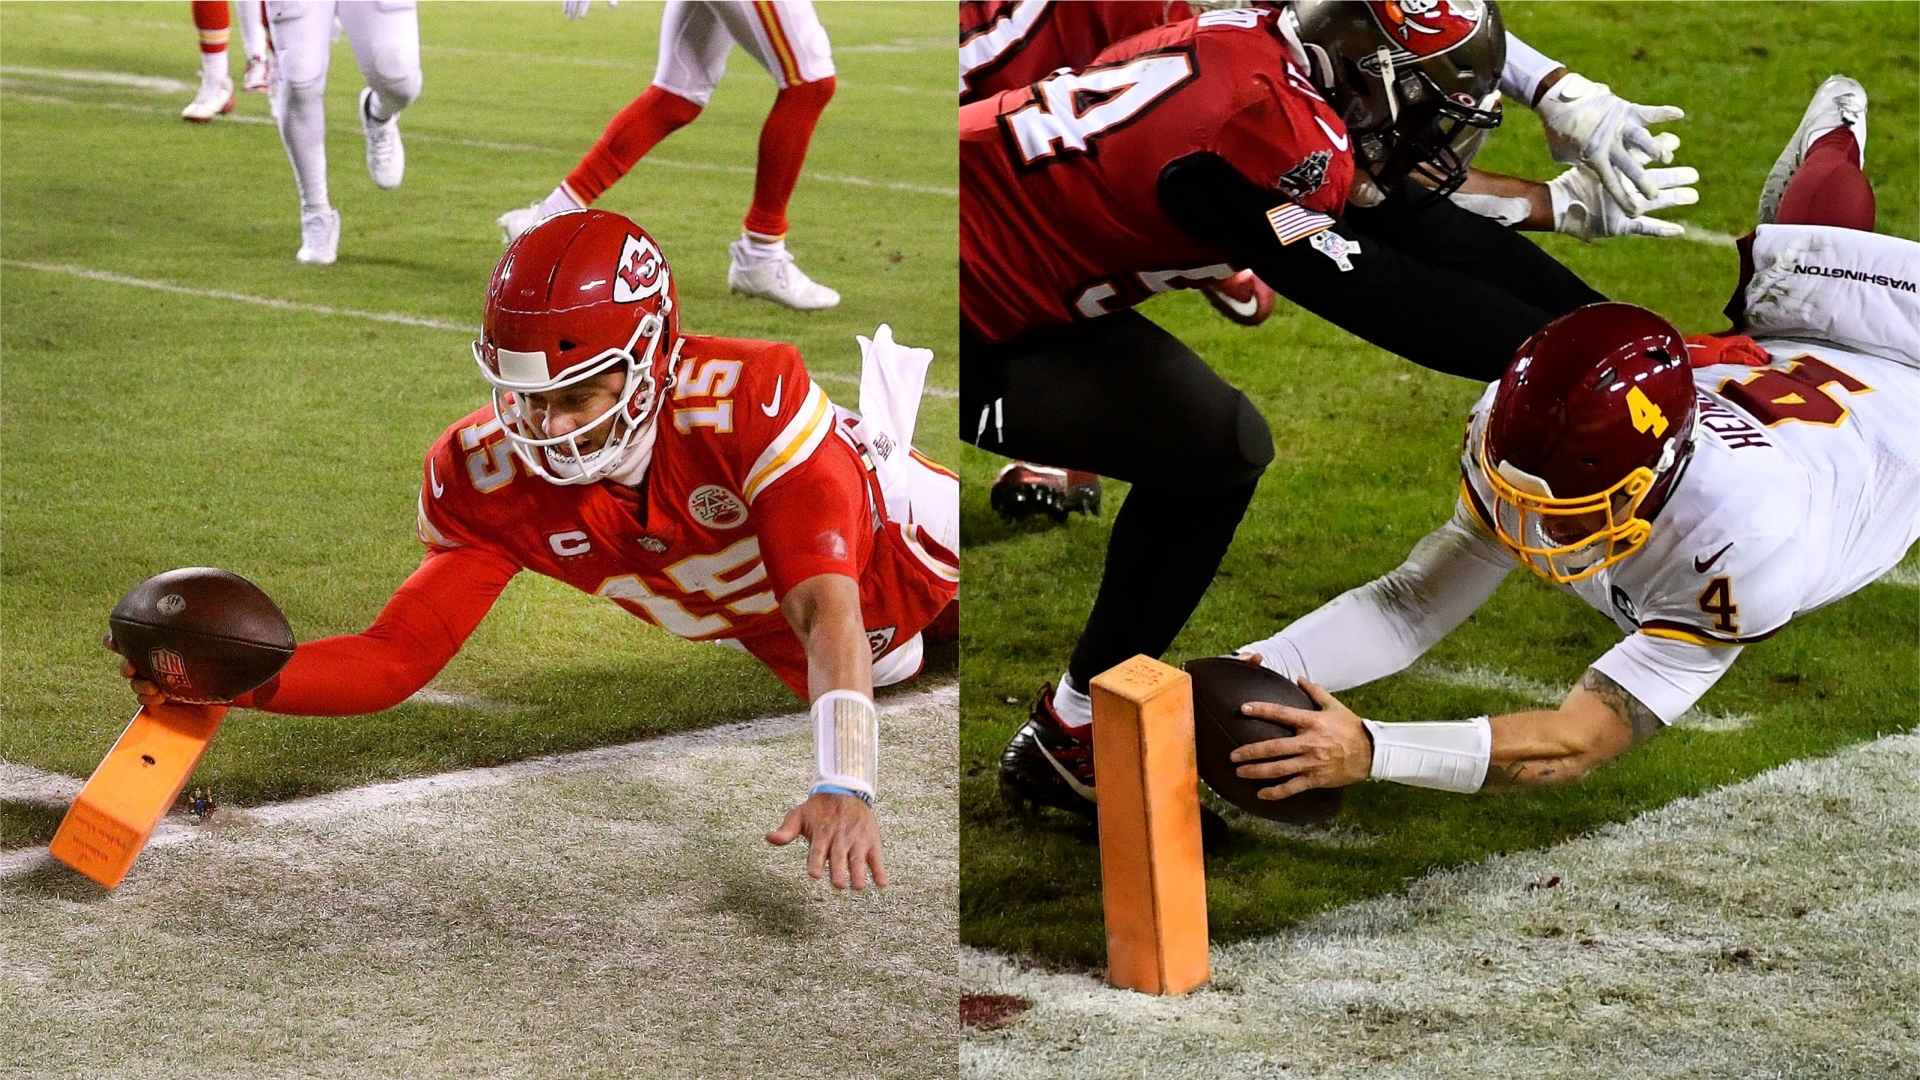 Patrick Mahomes and Taylor Heinicke dive for the pylon in separate playoff games